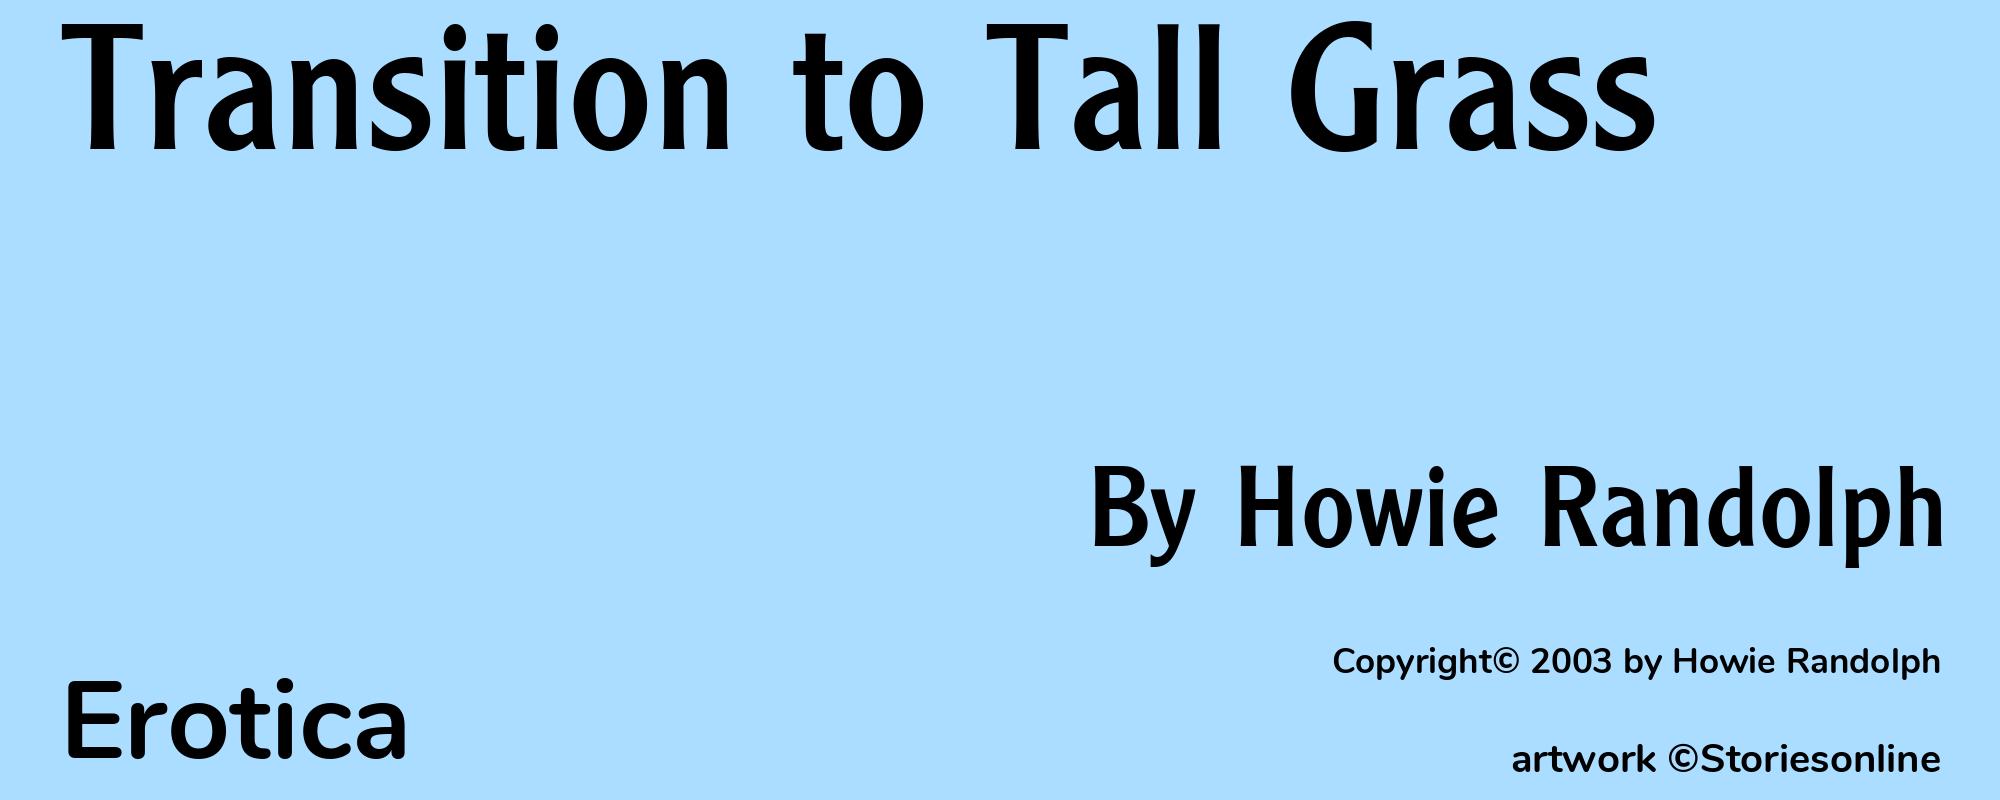 Transition to Tall Grass - Cover